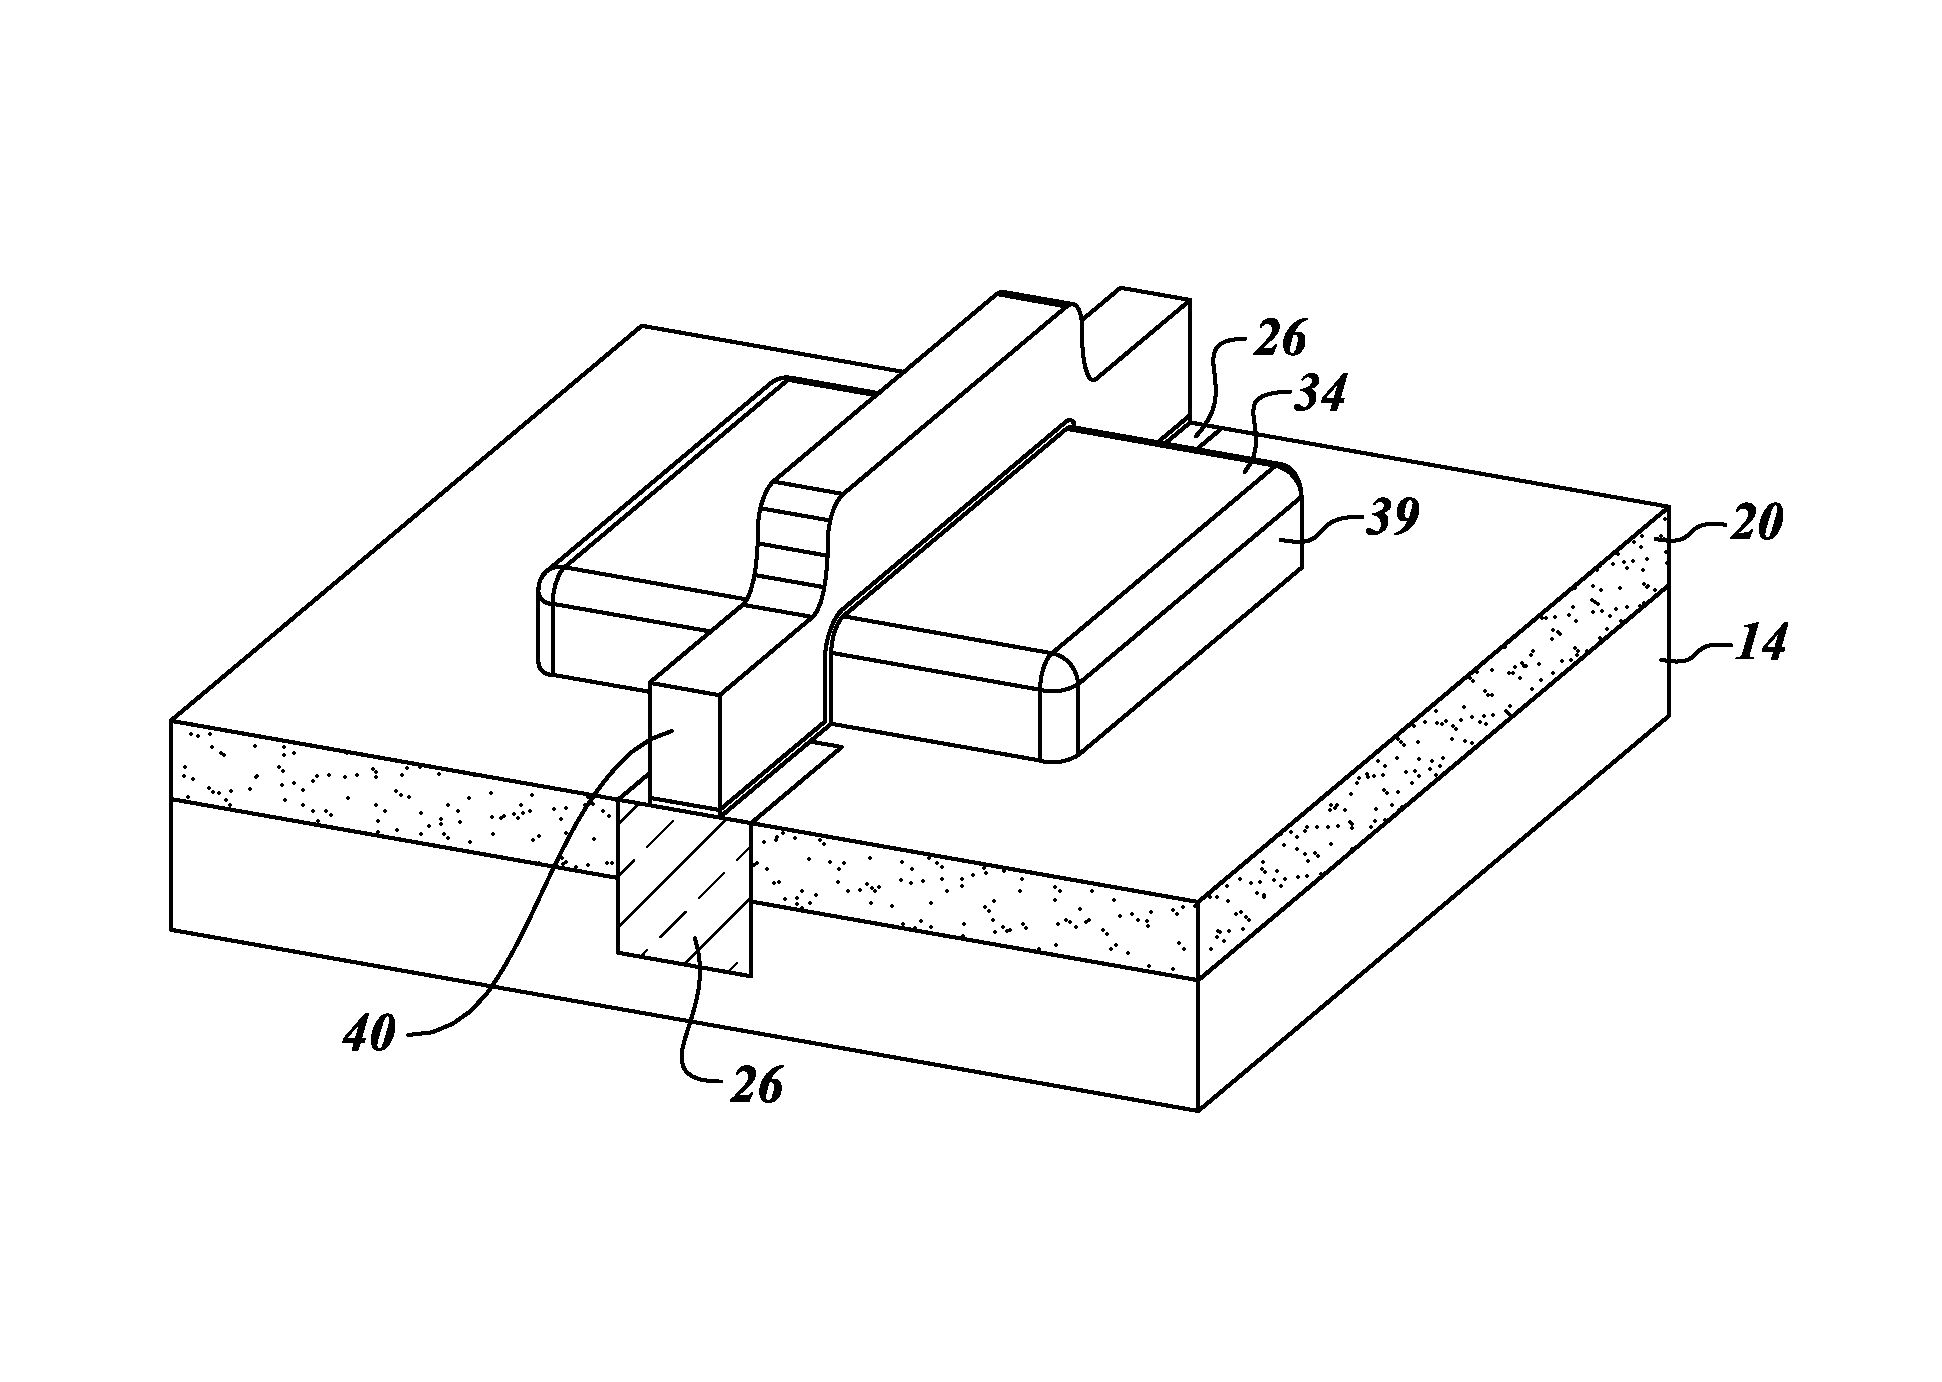 Structure and method for making a strained silicon transistor